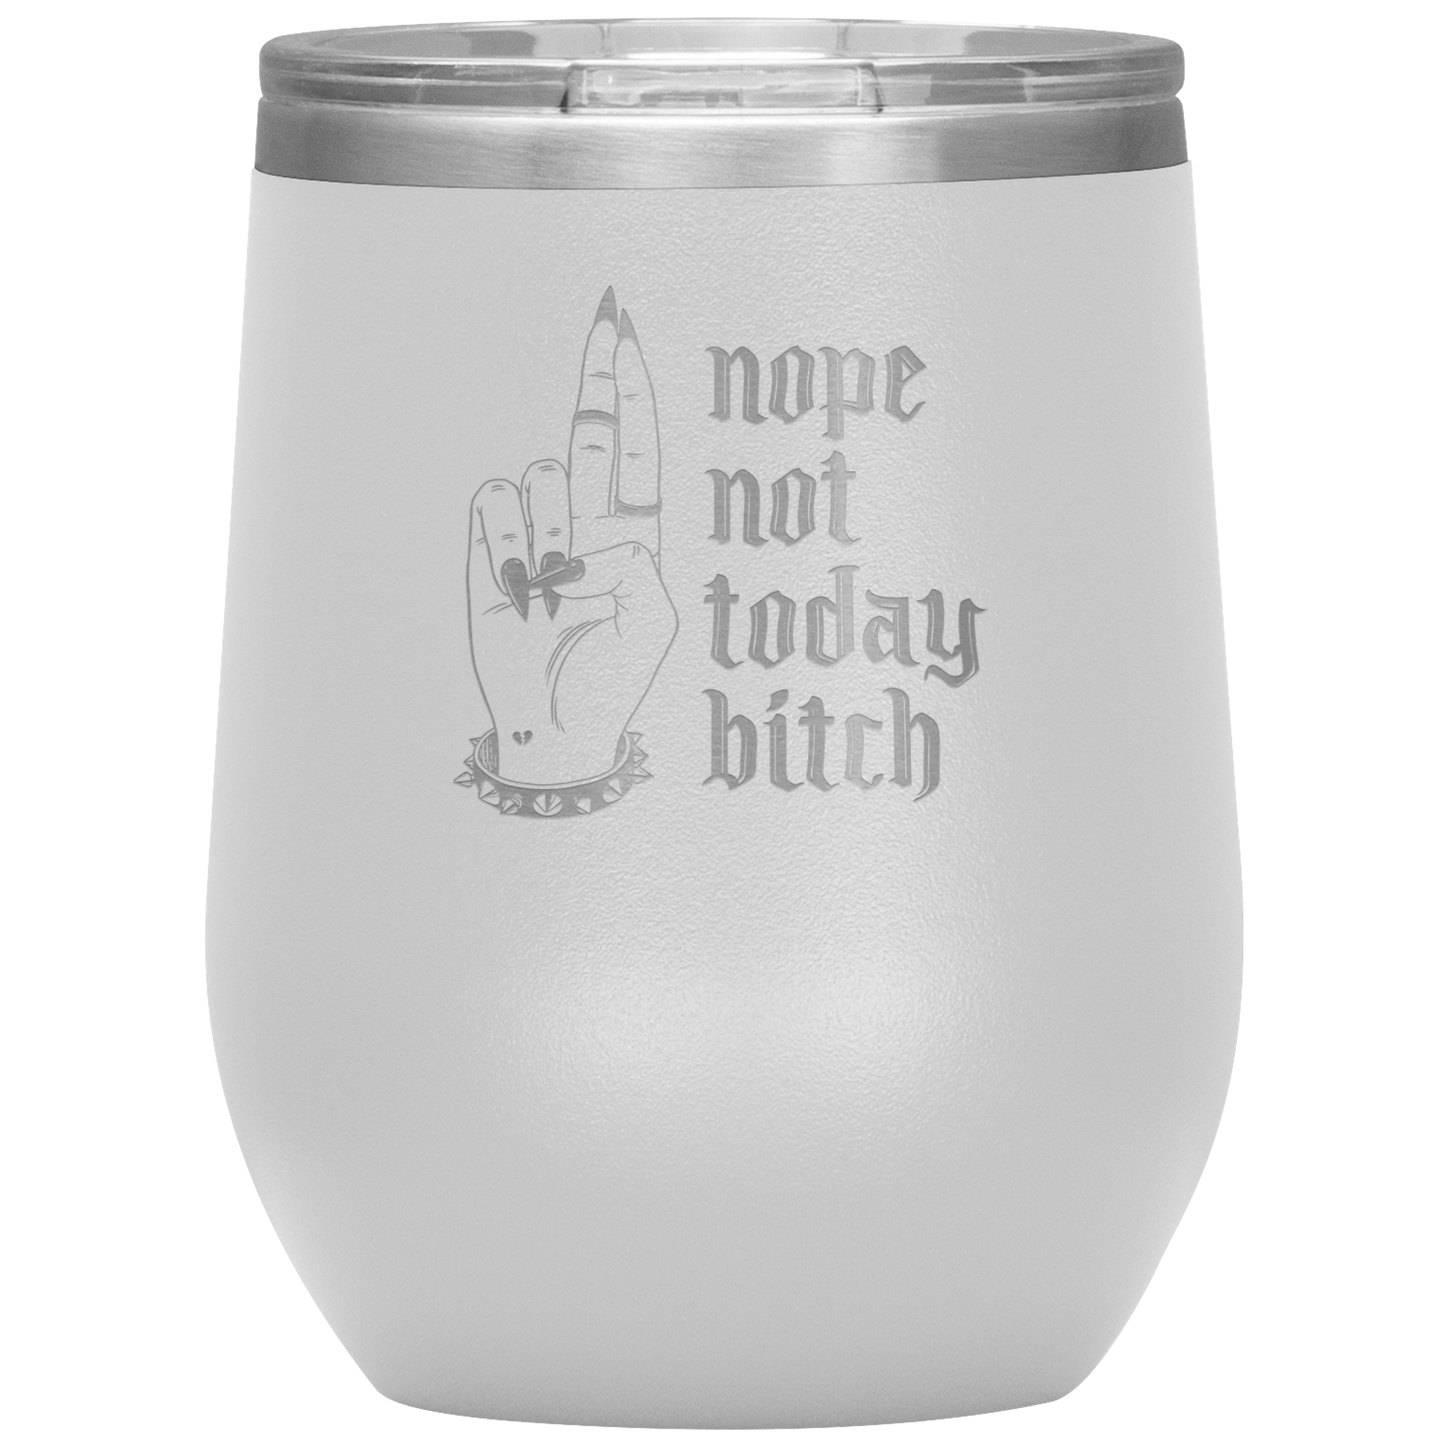 NOT TODAY BITCH WINE TUMBLER